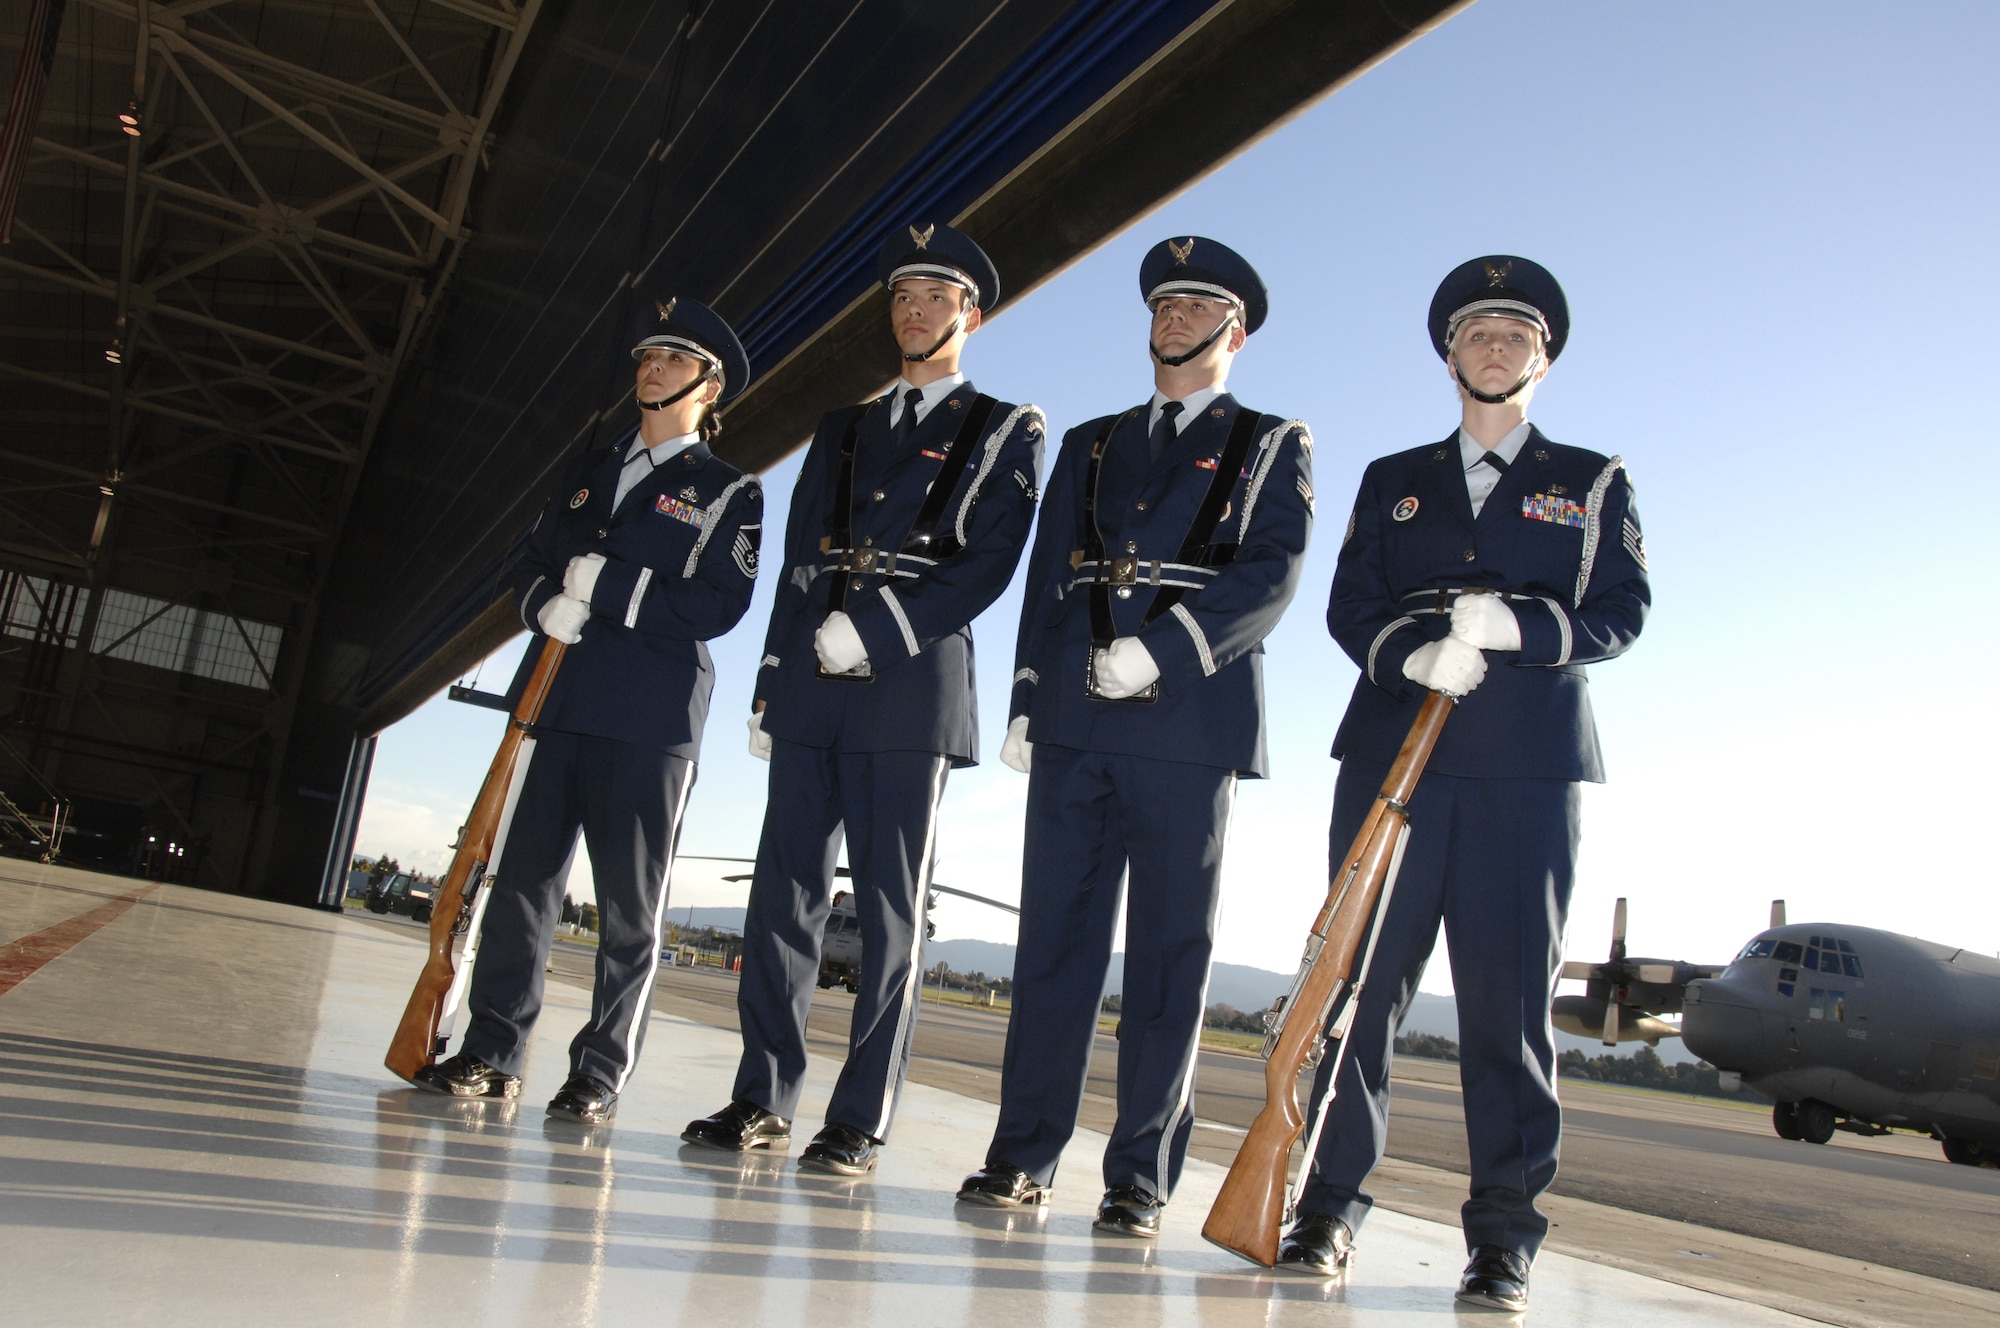 Base honor guard members from the 129th Rescue Wing, Moffett Federal Airfield, Calif., perform at a retirement ceremony at Moffett Field Feb. 7, 2009. (Air National Guard photo by Master Sgt. Dan Kacir)(RELEASED)